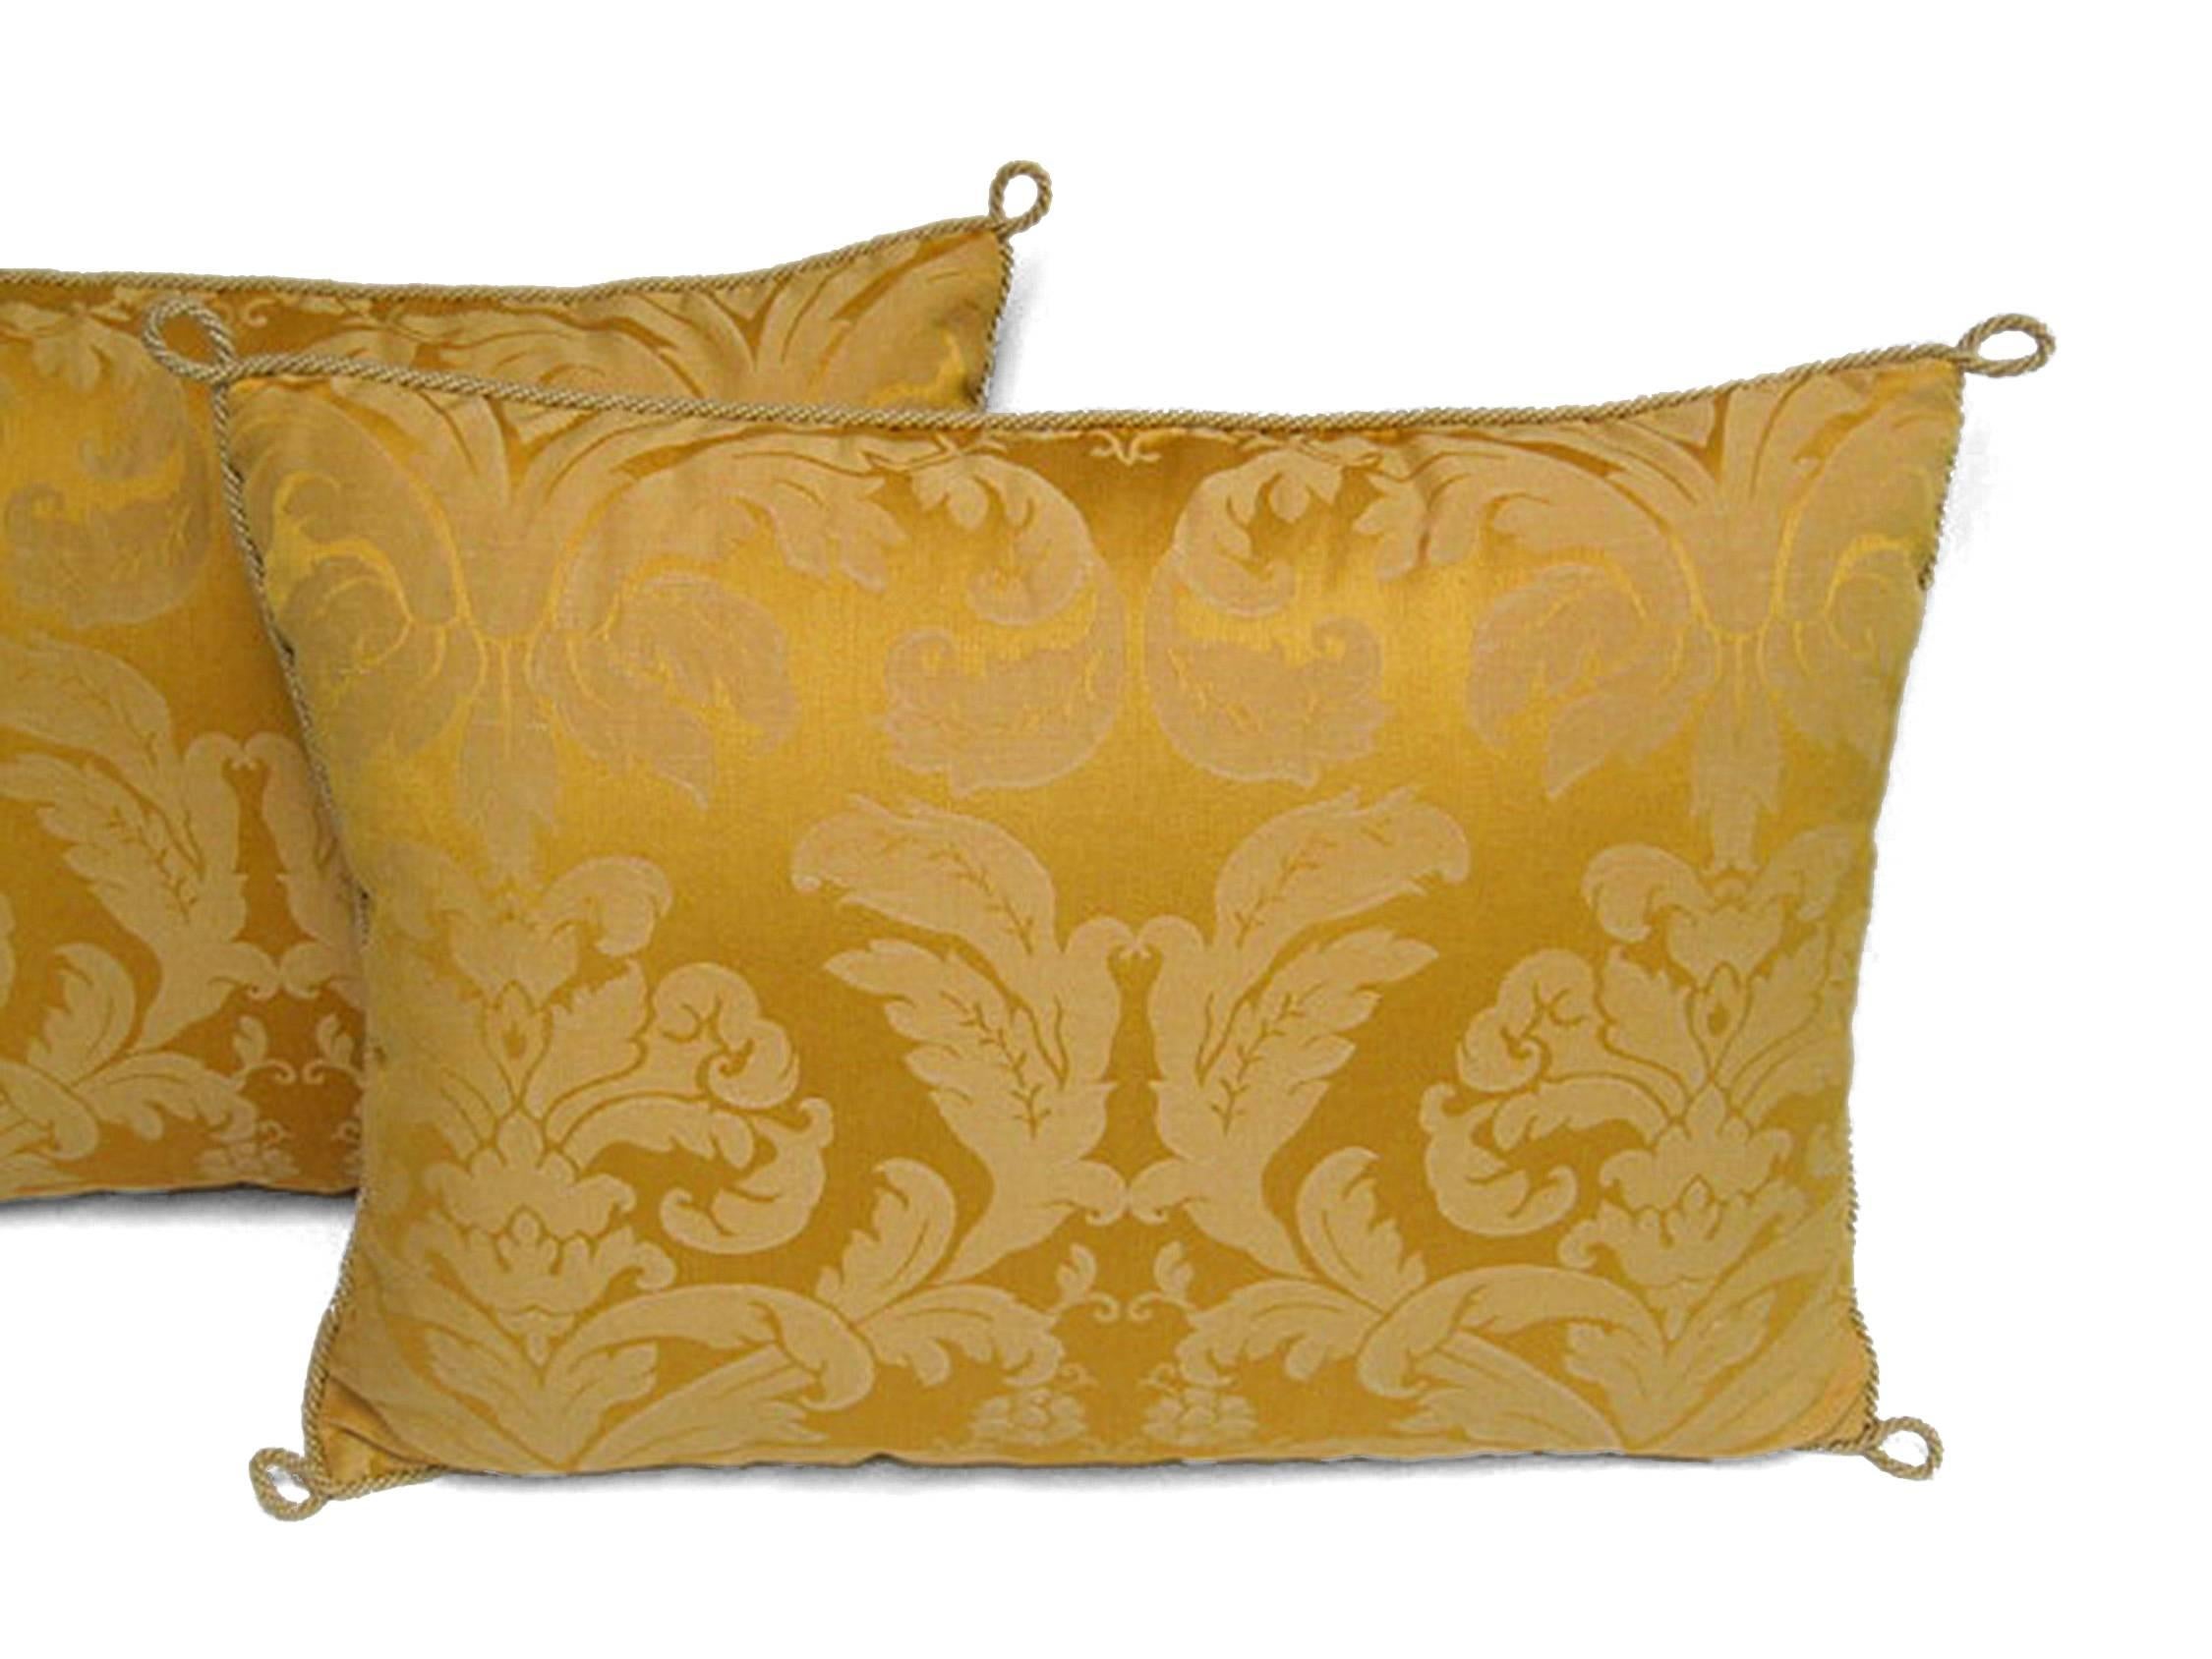 Pair of handmade yellow Damask pillows with a floral pattern. Rope trim with loops and 100% goose down filling.

